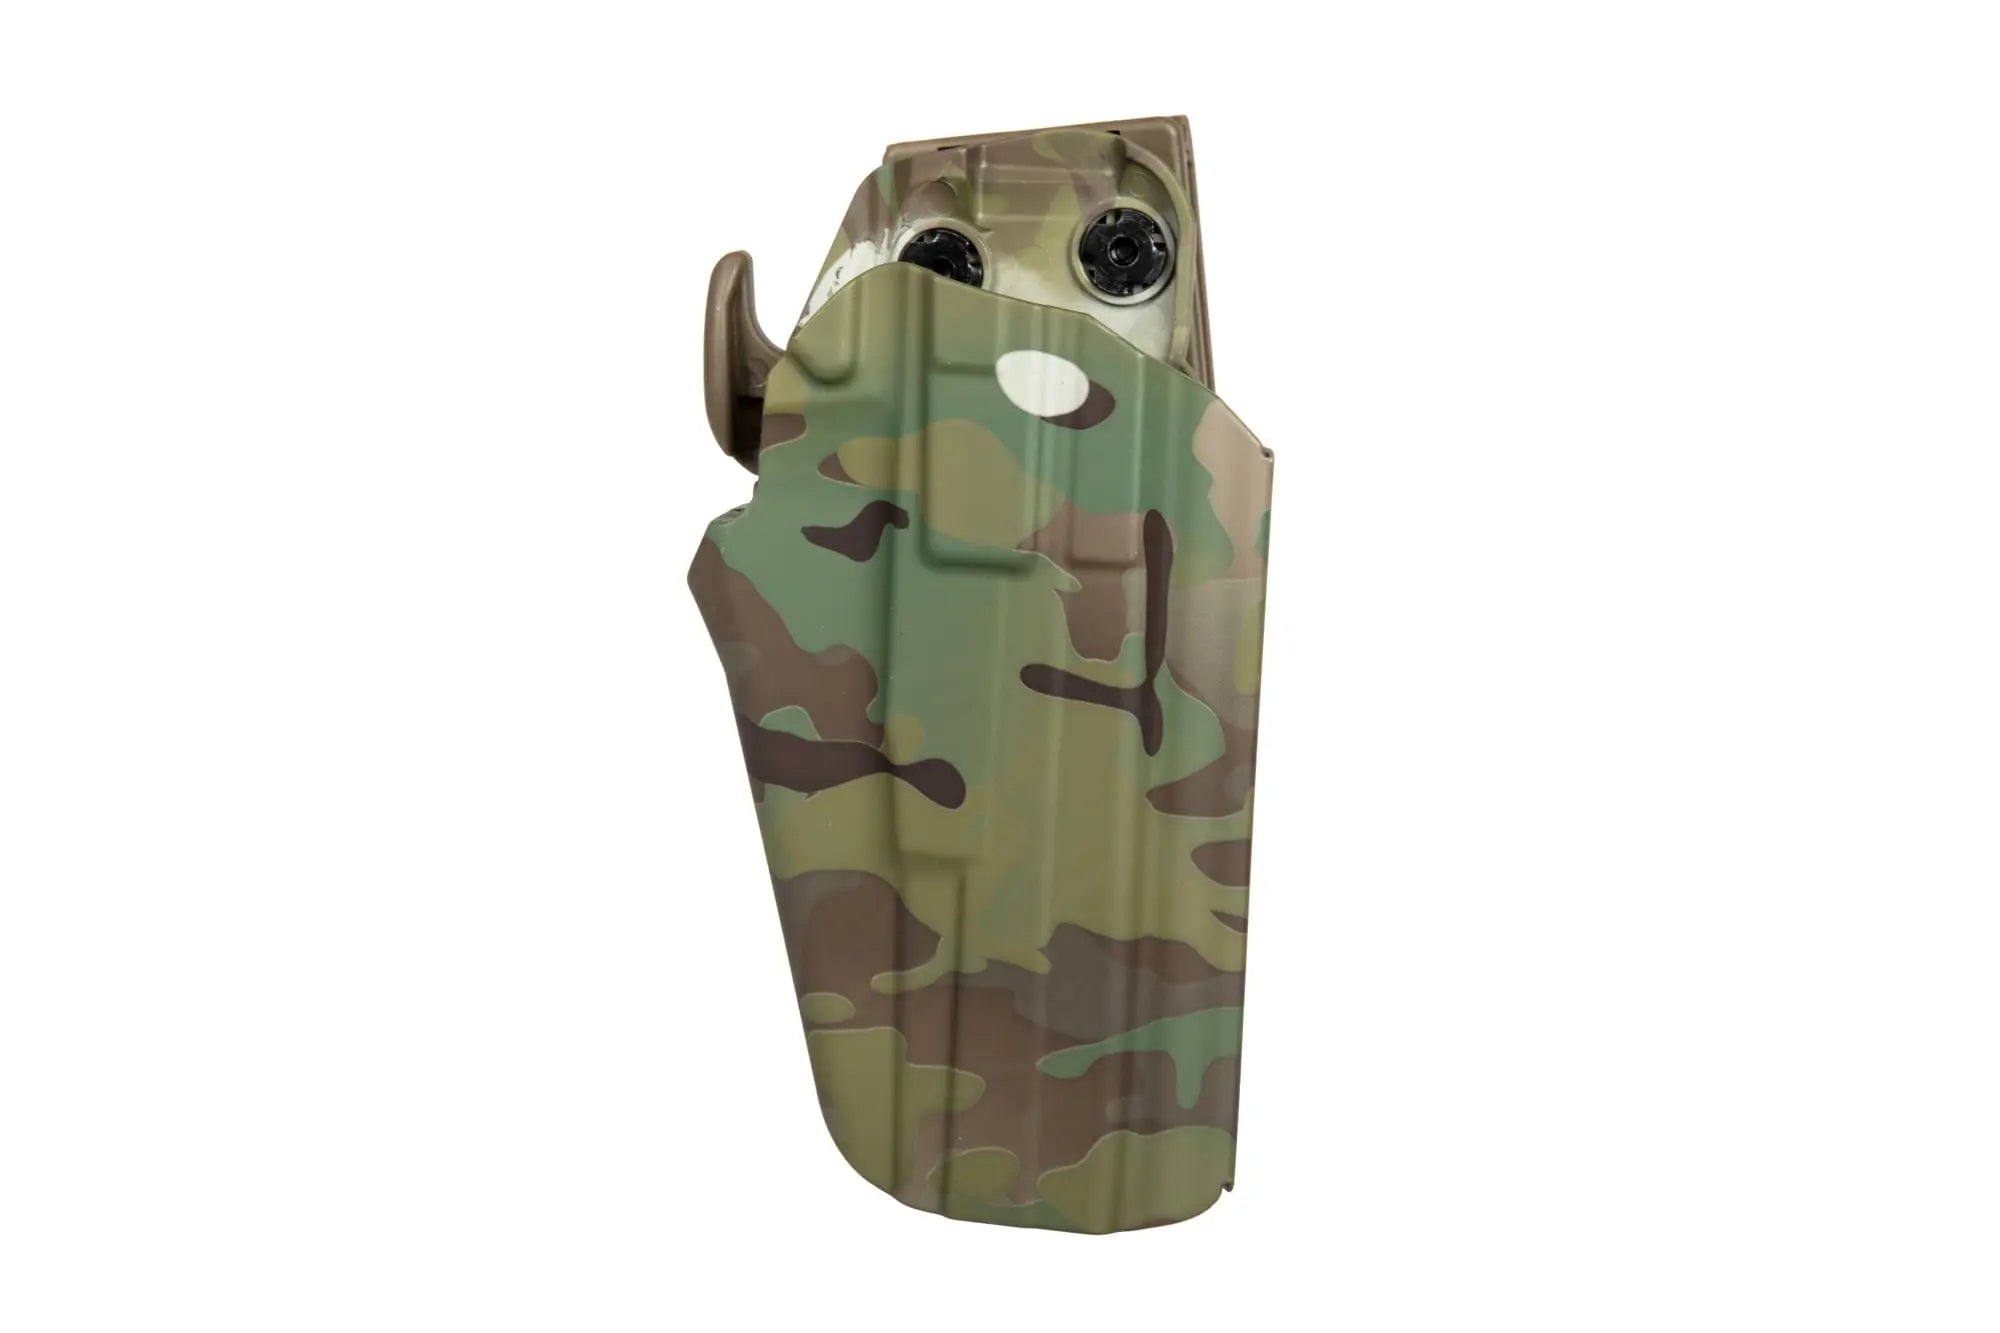 Universal Holster Sub-Compact (683) - Multicam